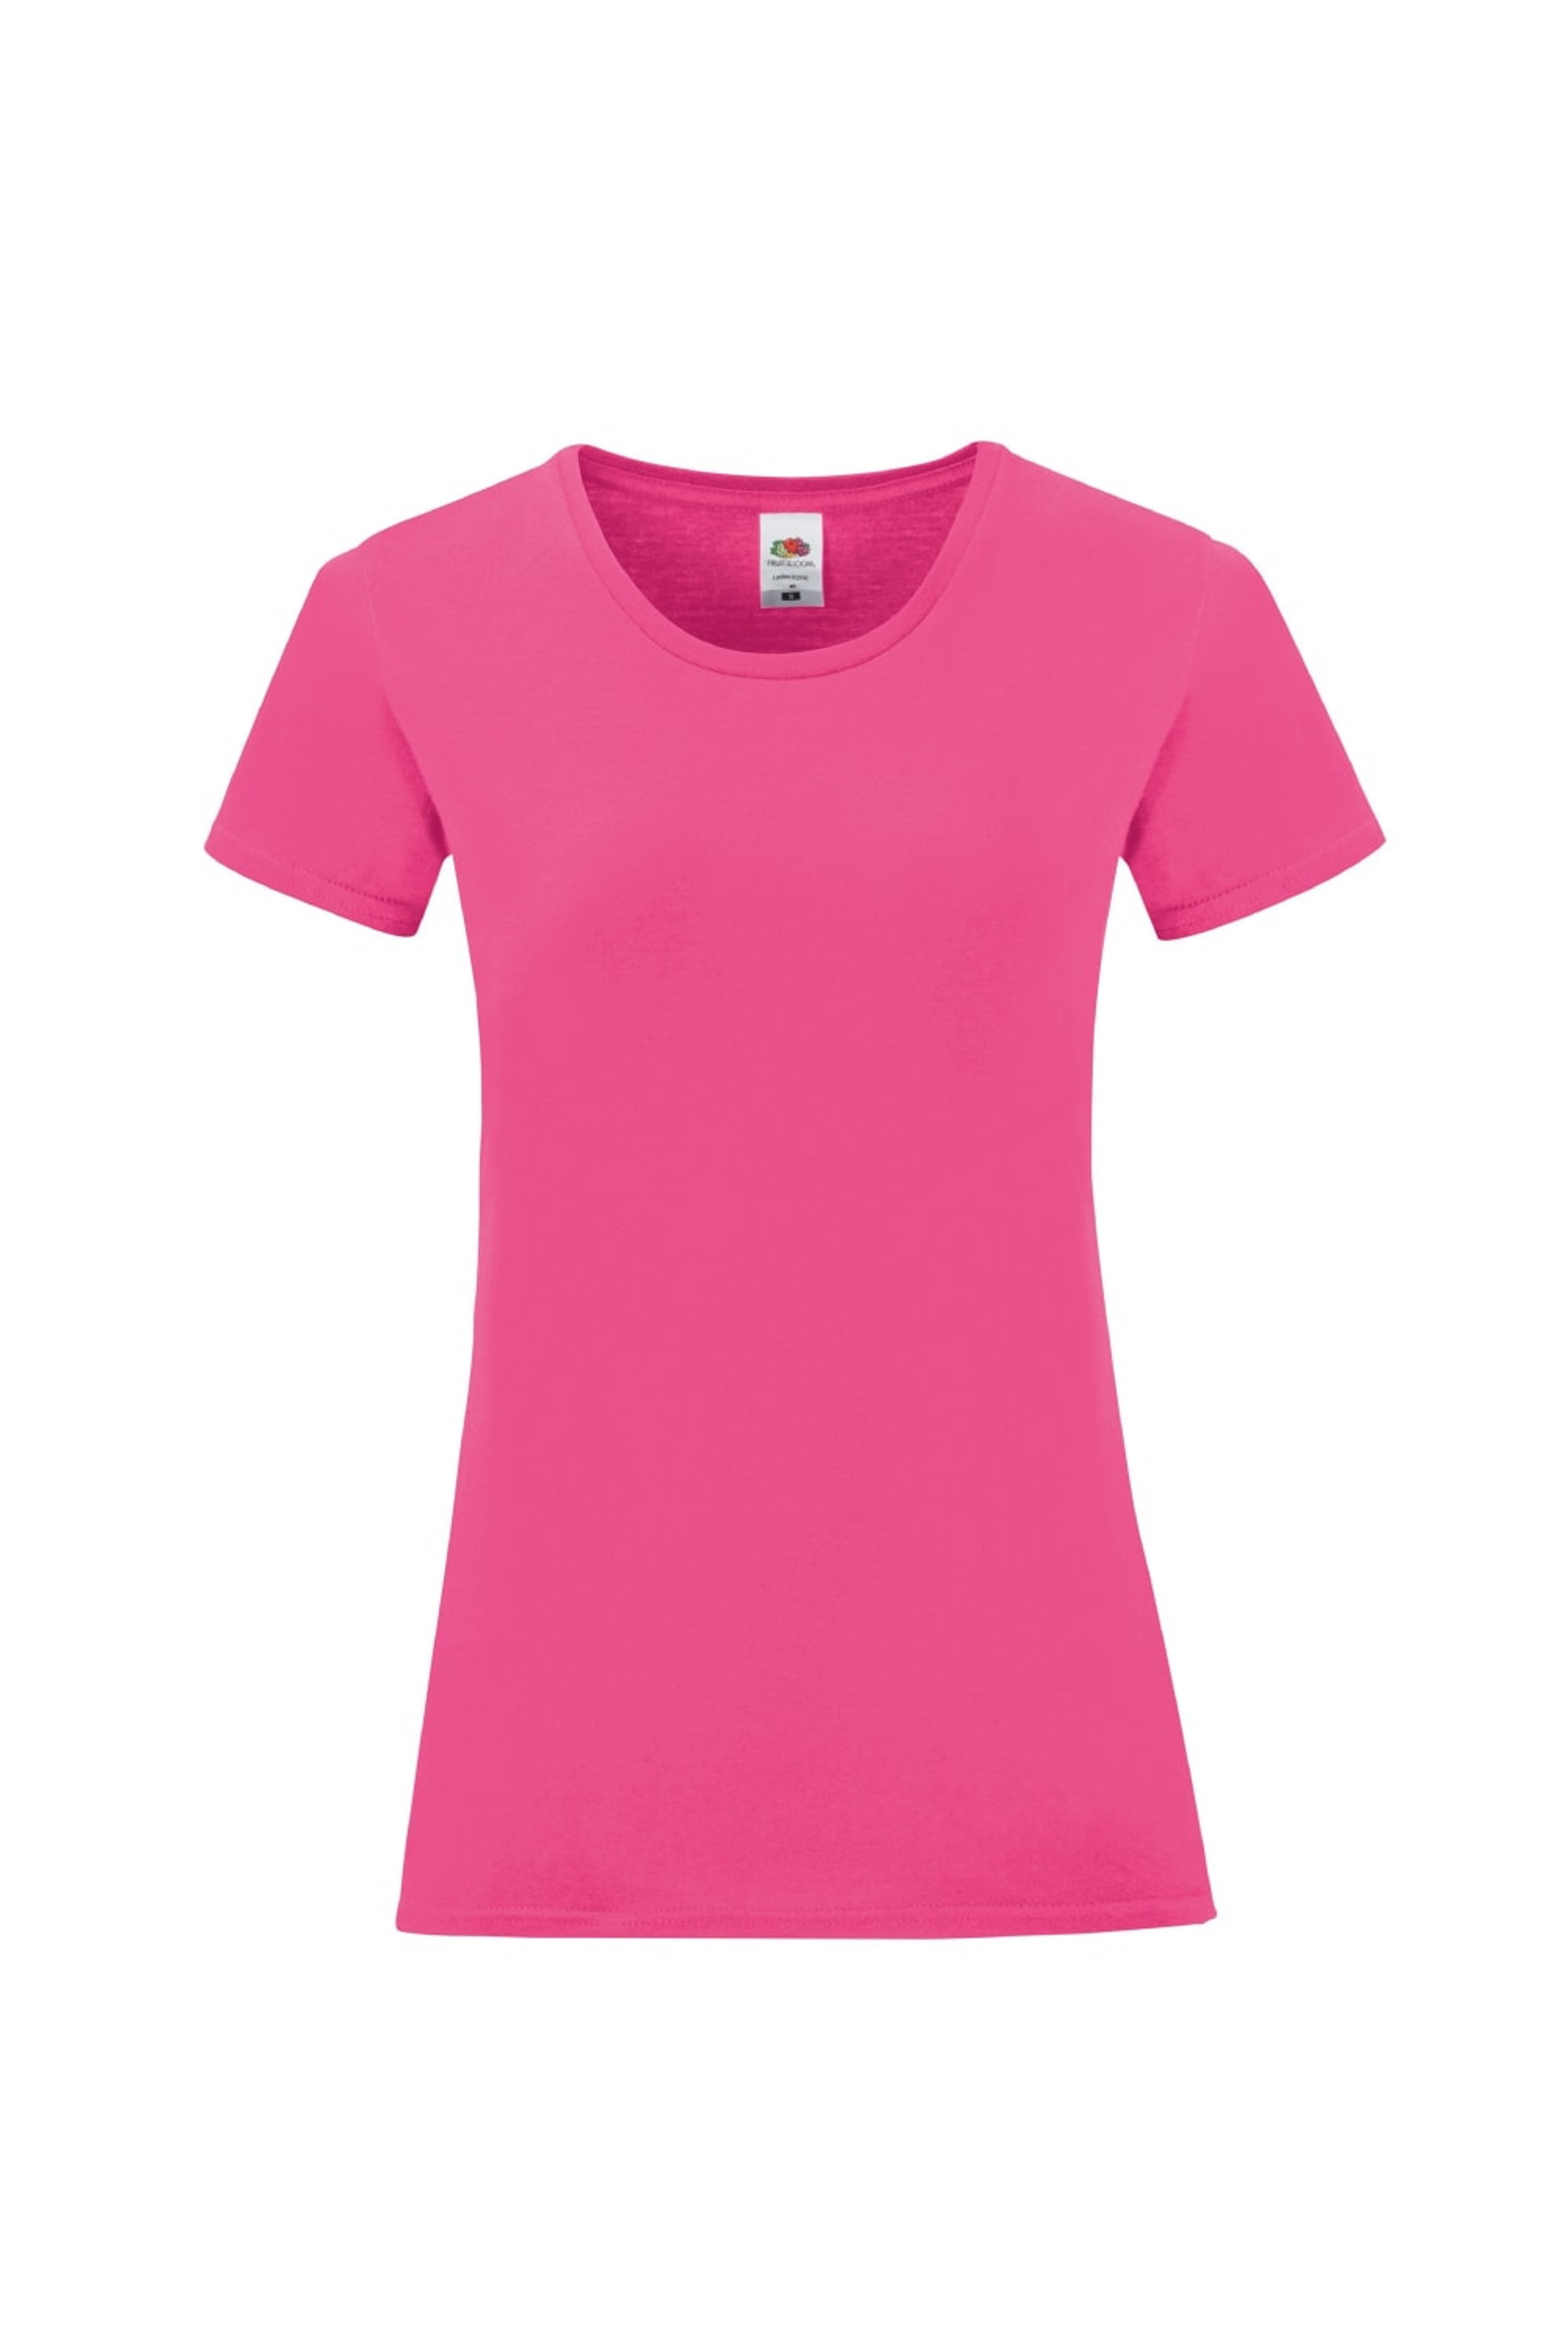 FRUIT OF THE LOOM FRUIT OF THE LOOM WOMENS/LADIES ICONIC 150 T-SHIRT